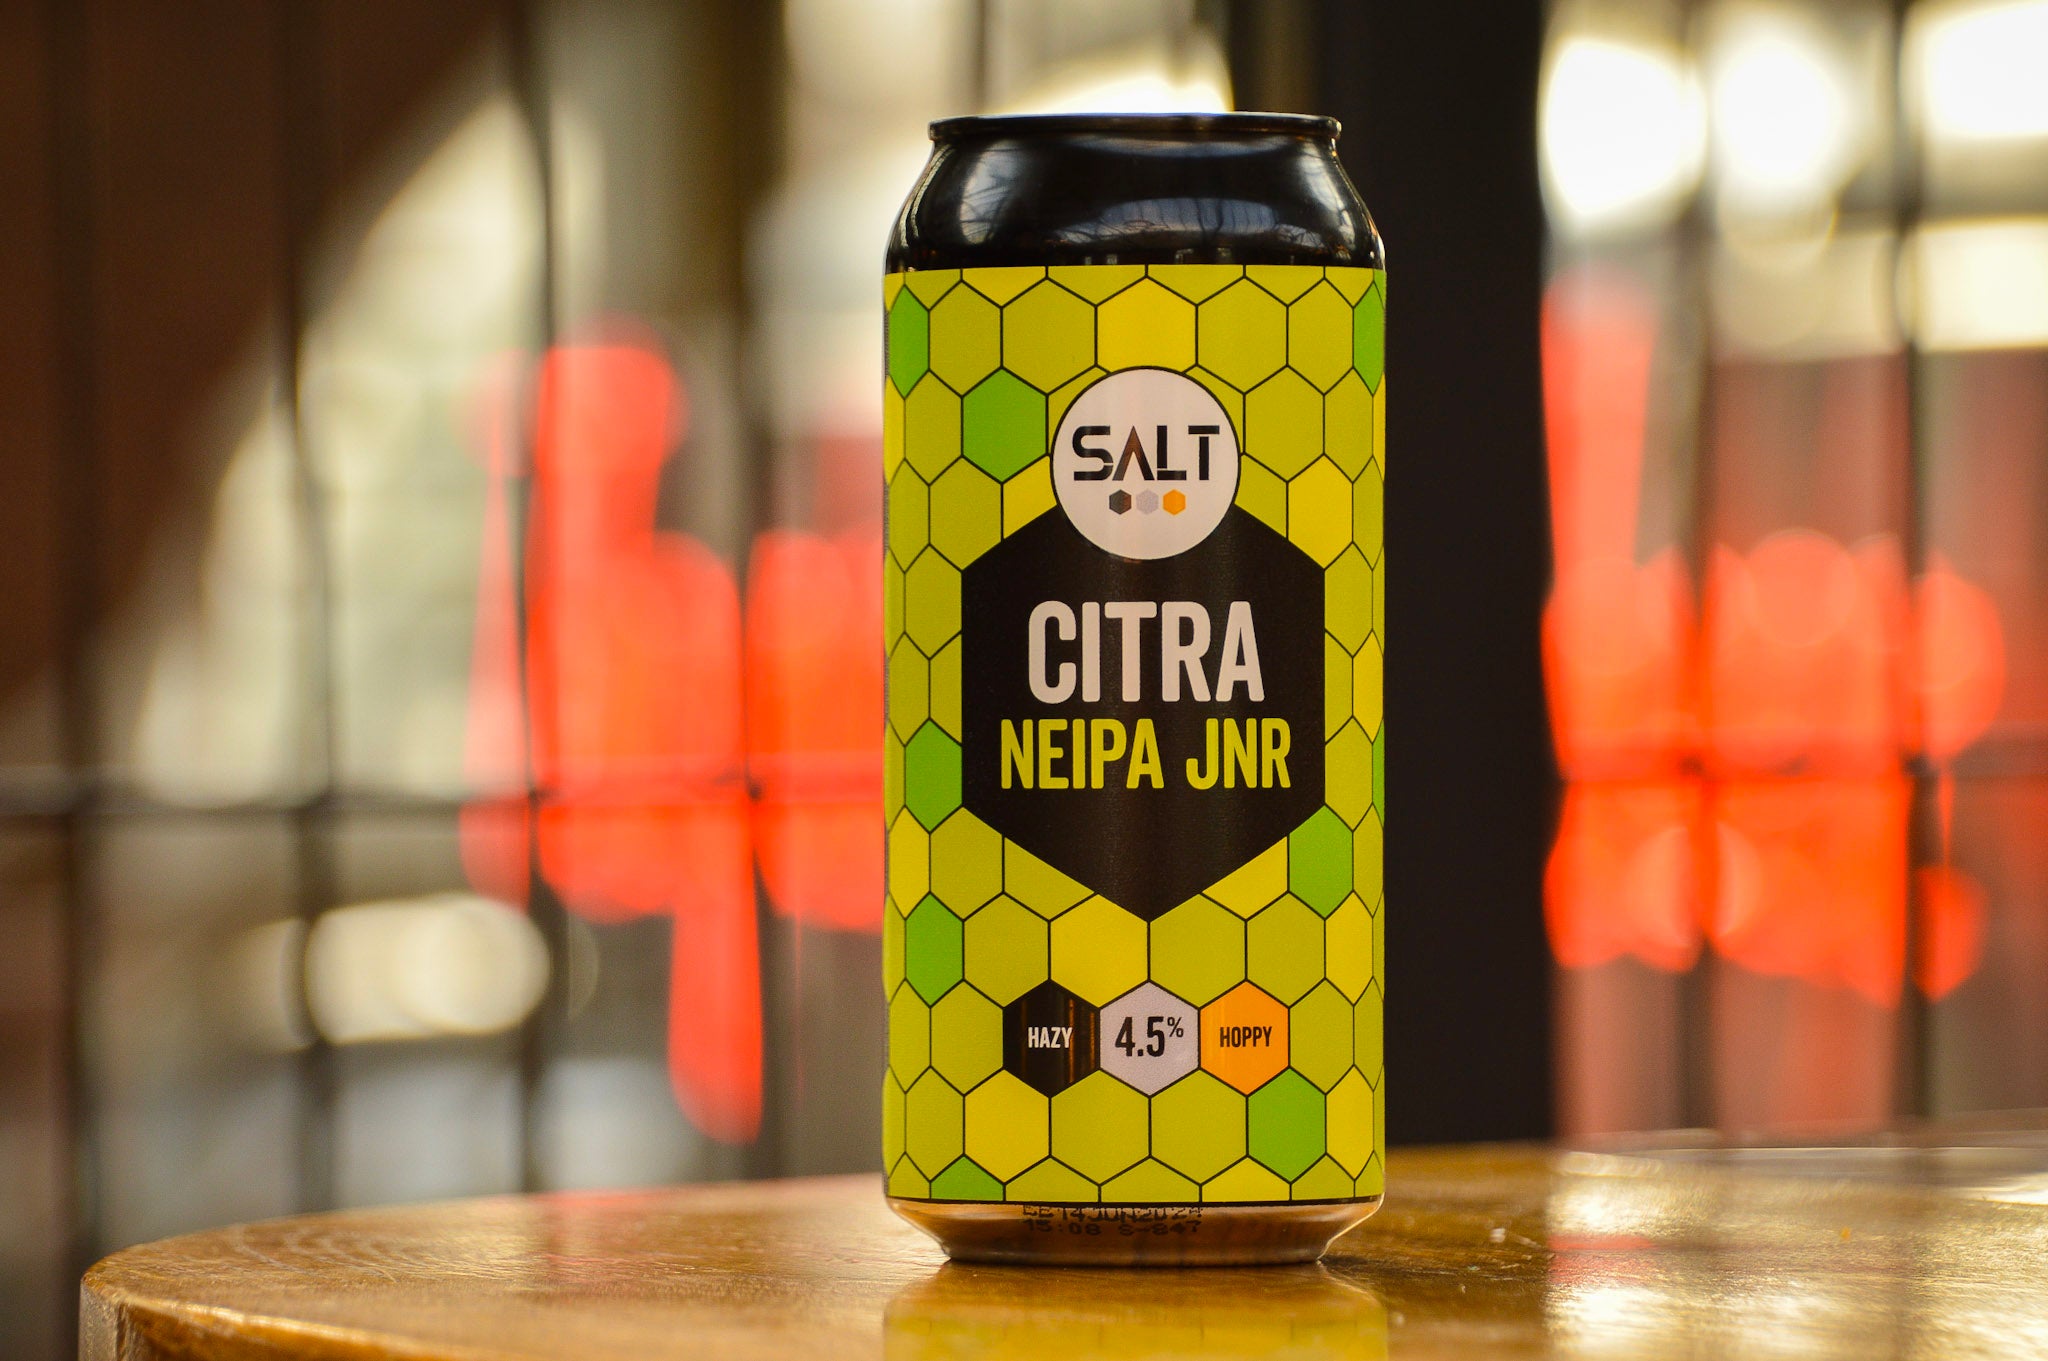 Weaving Citra into our core range with a new name.